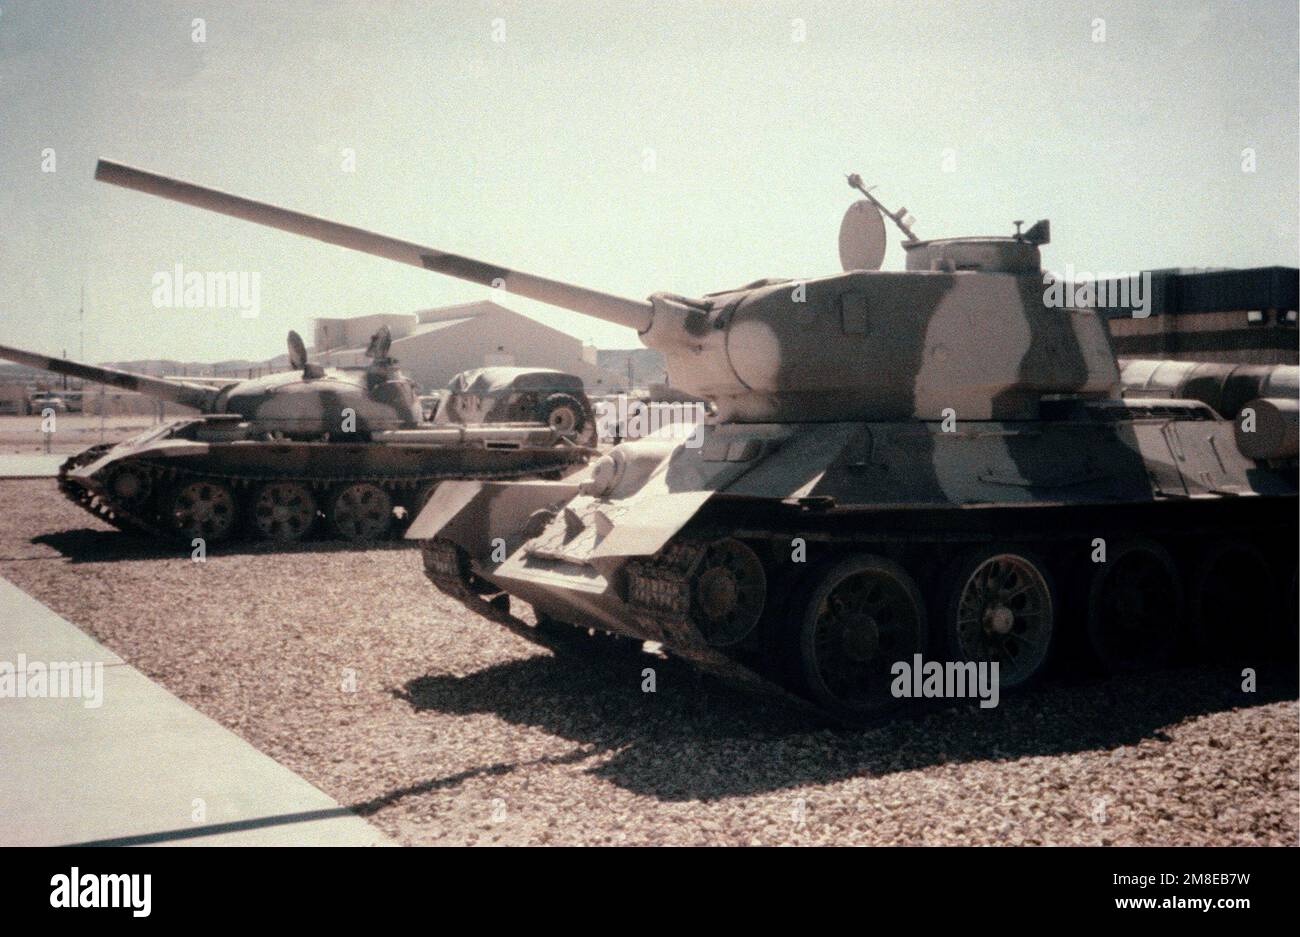 Left front view, on display, Soviet T34/85 Medium Tank. Soviet T-62 Main Battle Tank in background. Country: Unknown Stock Photo